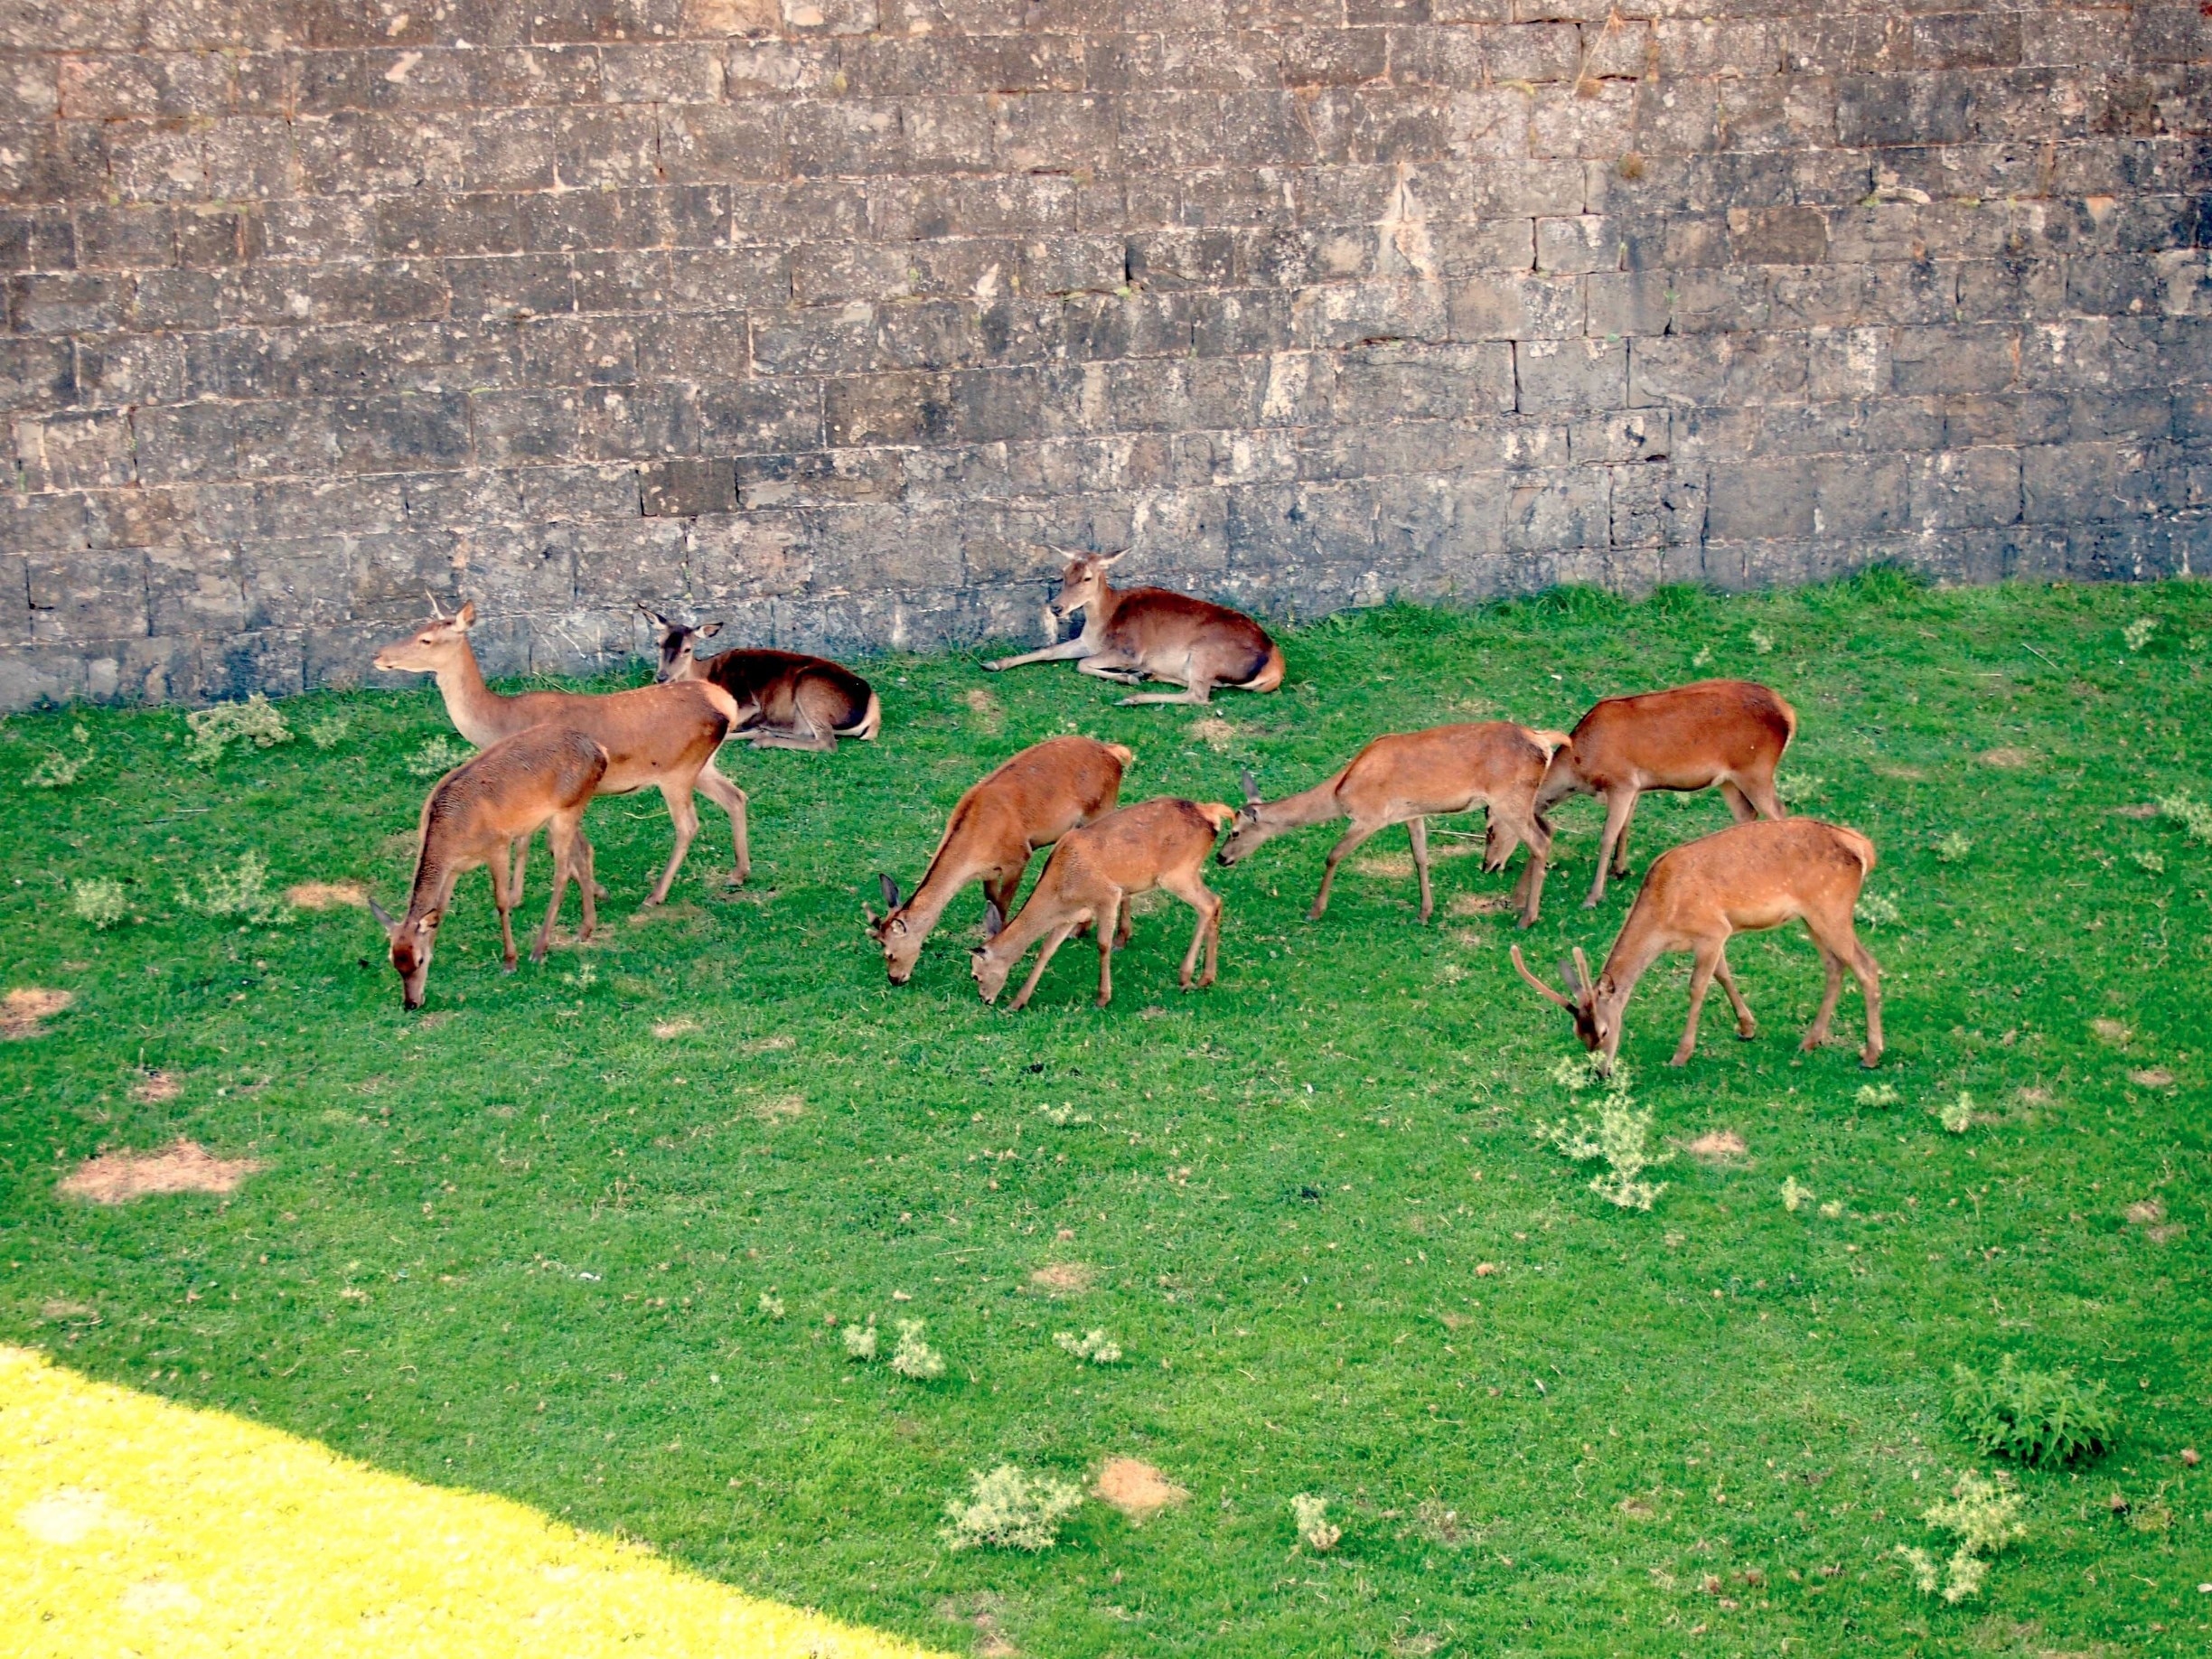 La Ciudadela de Jaca is the ancient castle of the Kings of Aragon, and though it is striking just in of itself, the deers that graze freely in the grassy moat are an amazing attraction!
#caminodesantiago   

DAY 1 - JACA http://www.endoftherainbow.net/blogita/giorno3km0jaca